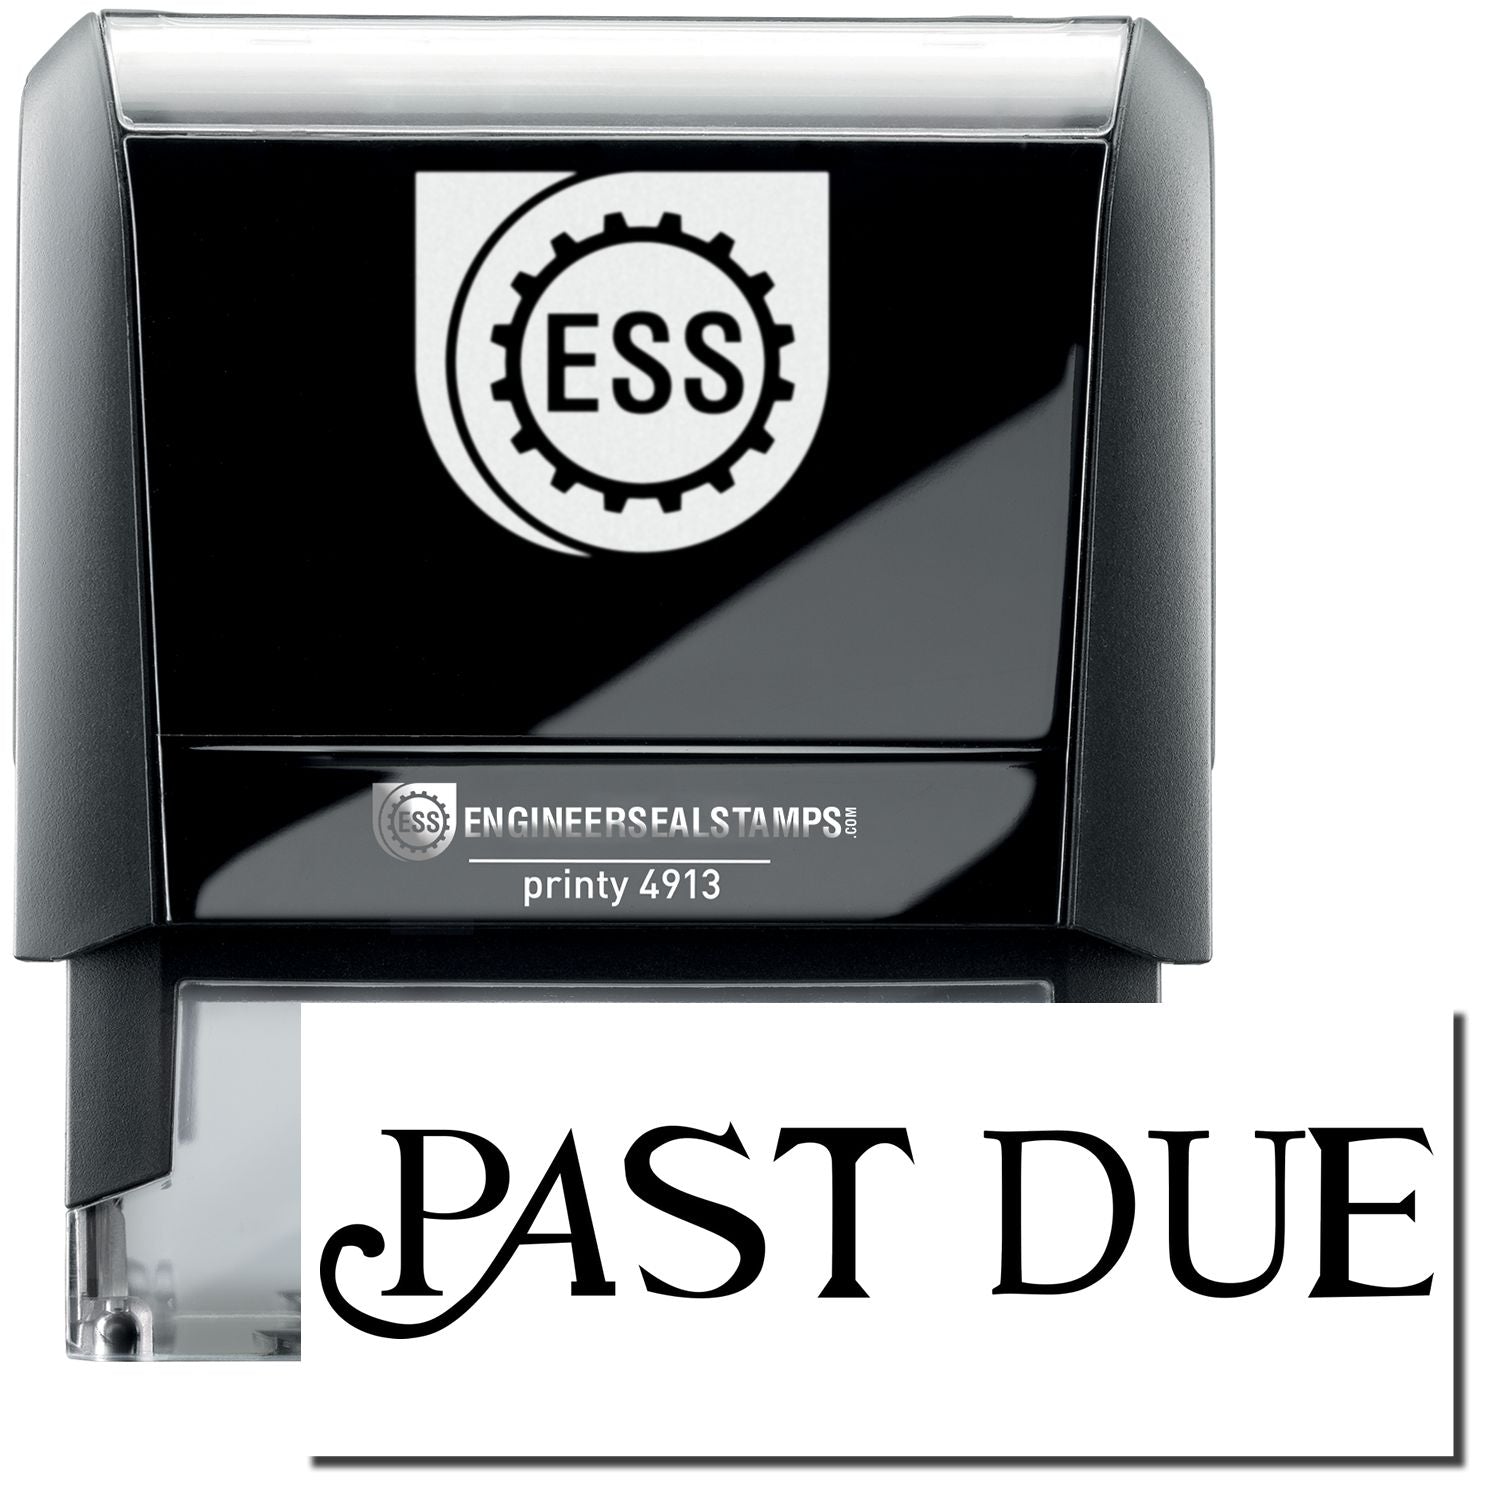 A self-inking stamp with a stamped image showing how the text "PAST DUE" in a large curley font is displayed by it after stamping.